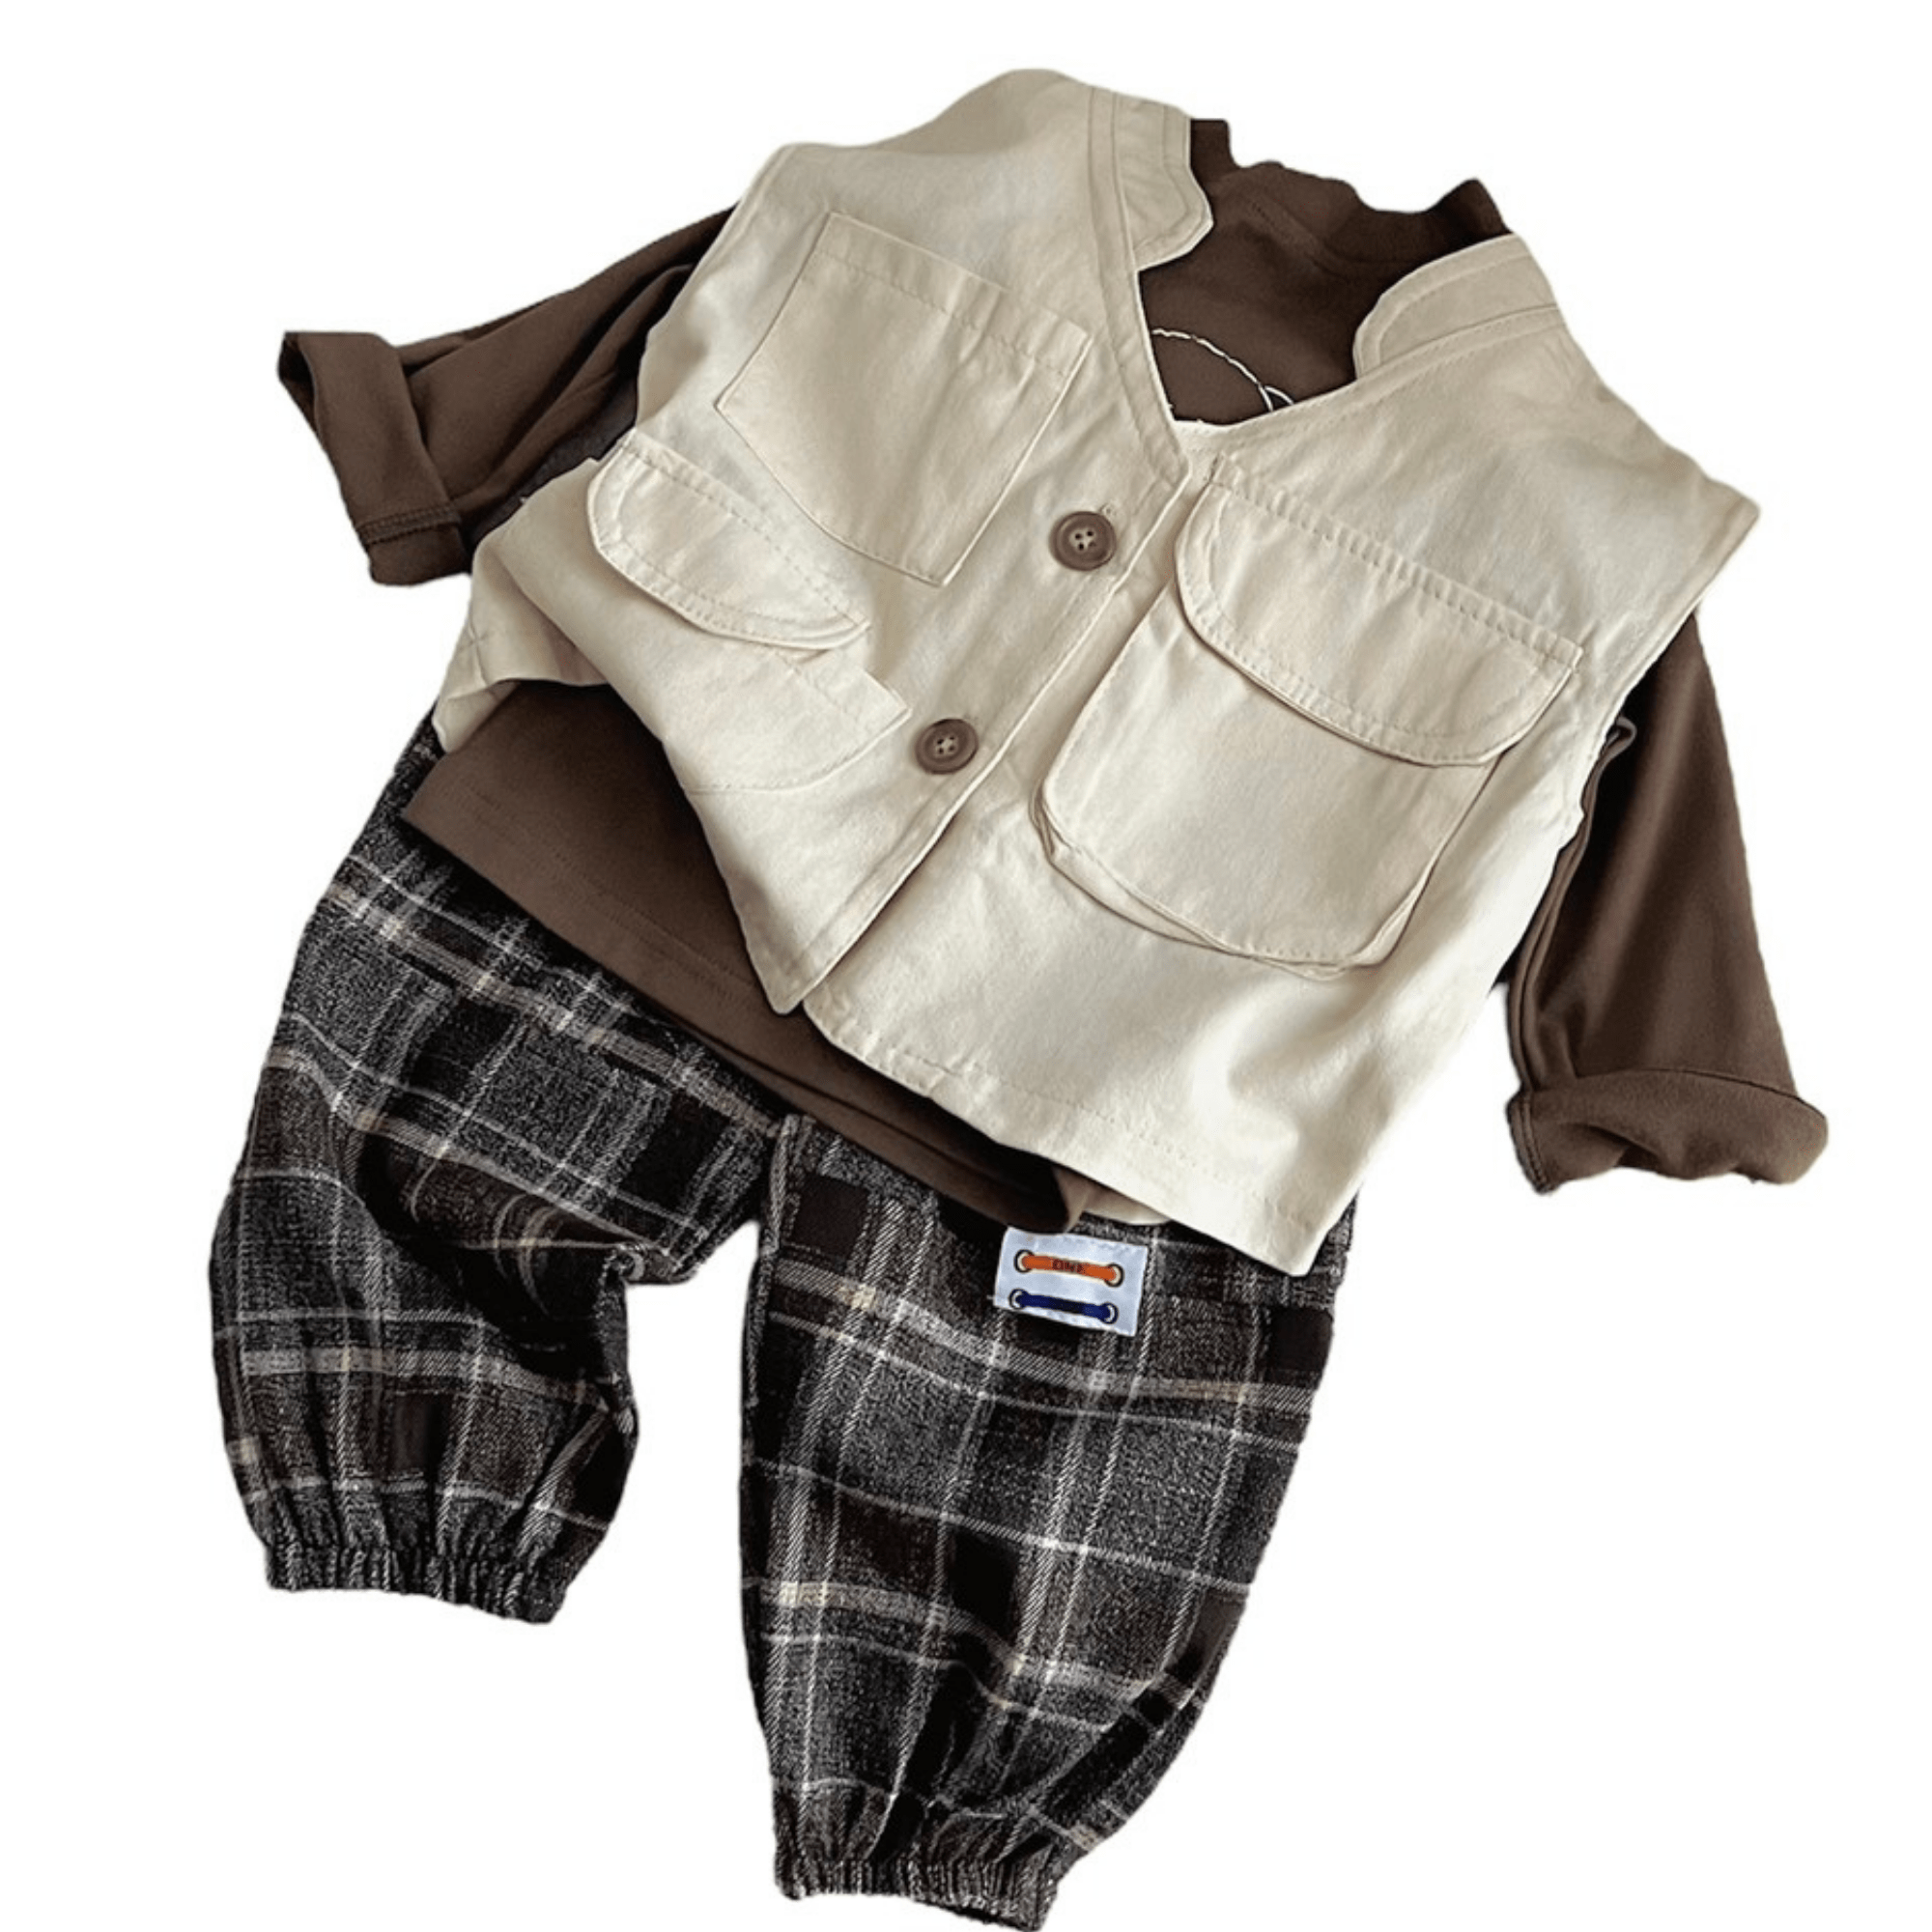 Kids Clothes Girls Comfortable Polyester Baby Boys Set Casual Each One In Opp Bag Made In Vietnam Manufacturer